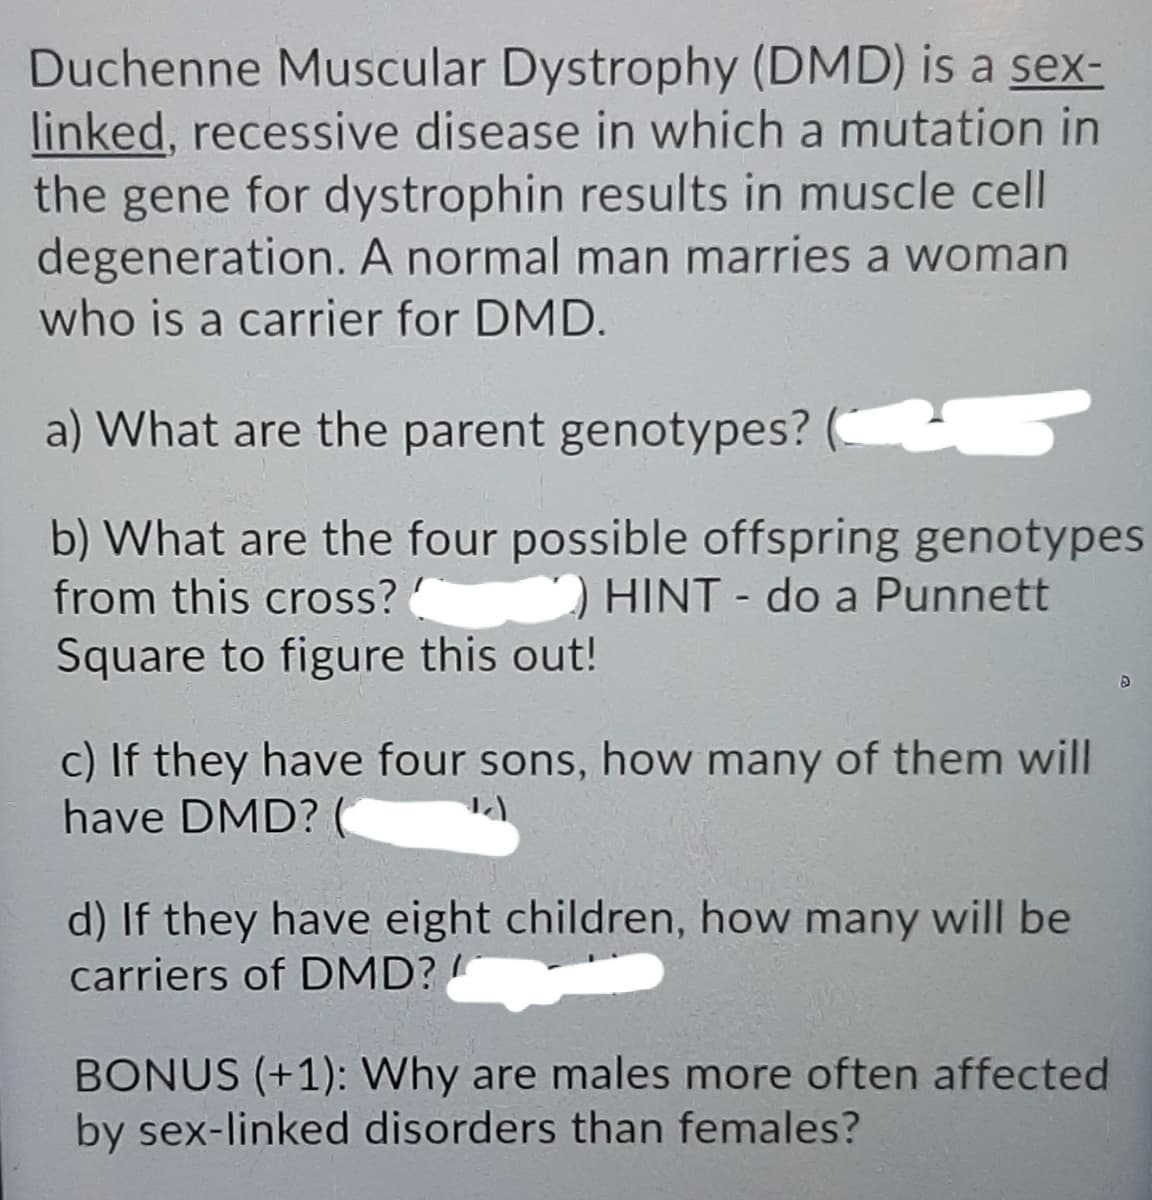 Duchenne Muscular Dystrophy (DMD) is a sex-
linked, recessive disease in which a mutation in
the gene for dystrophin results in muscle cell
degeneration. A normal man marries a woman
who is a carrier for DMD.
a) What are the parent genotypes?
b) What are the four possible offspring genotypes
from this cross? HINT - do a Punnett
Square to figure this out!
c) If they have four sons, how many of them will
have DMD? (
d) If they have eight children, how many will be
carriers of DMD?
BONUS (+1): Why are males more often affected
by sex-linked disorders than females?
